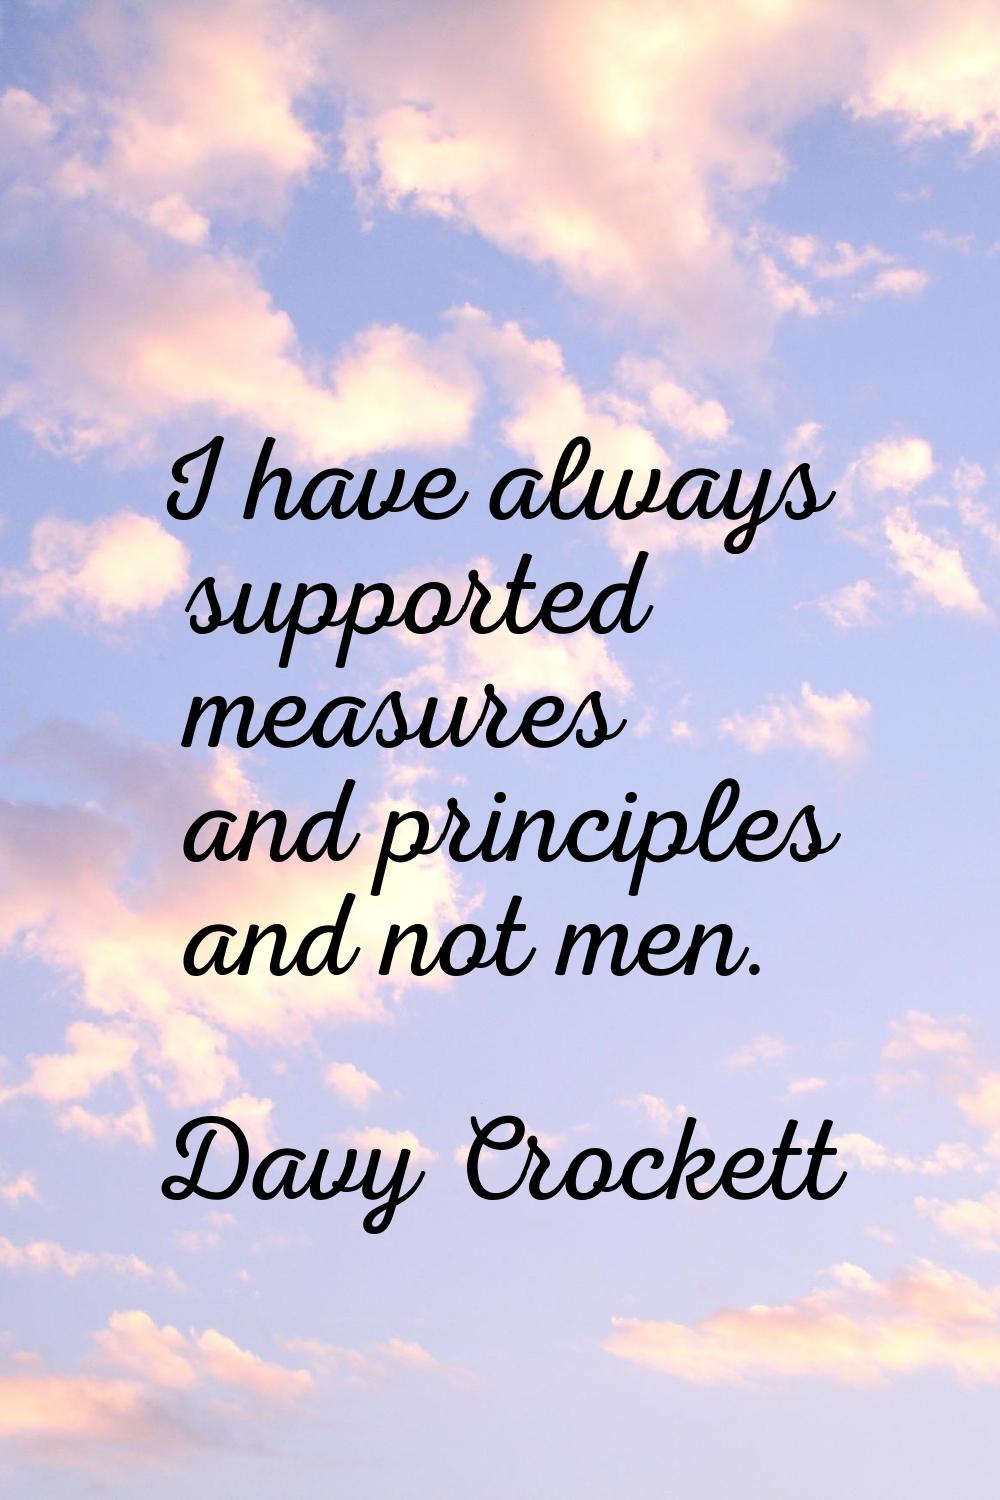 I have always supported measures and principles and not men.